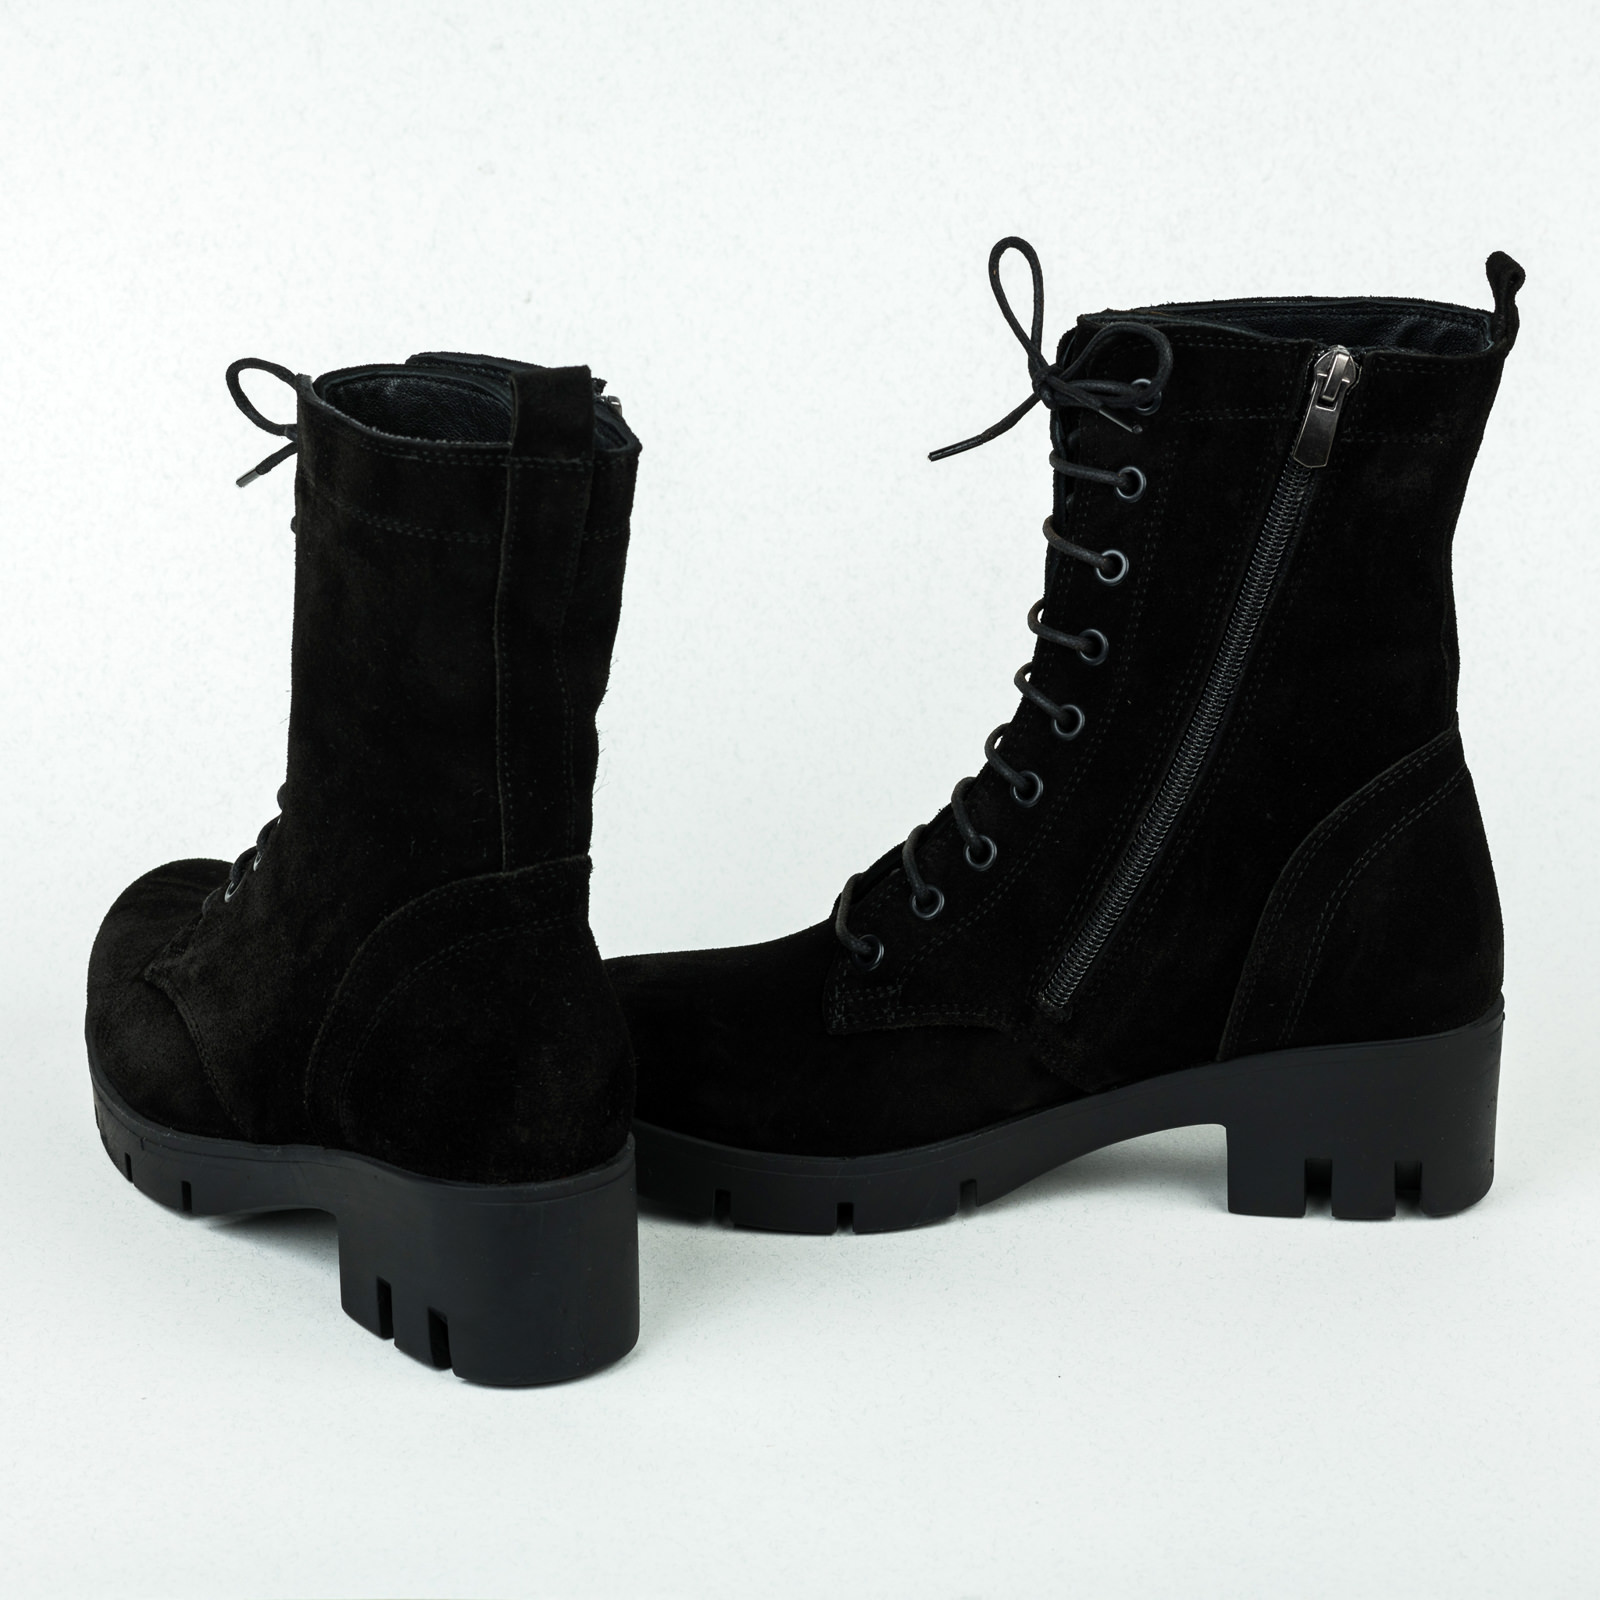 Leather ankle boots B053 - BLACK